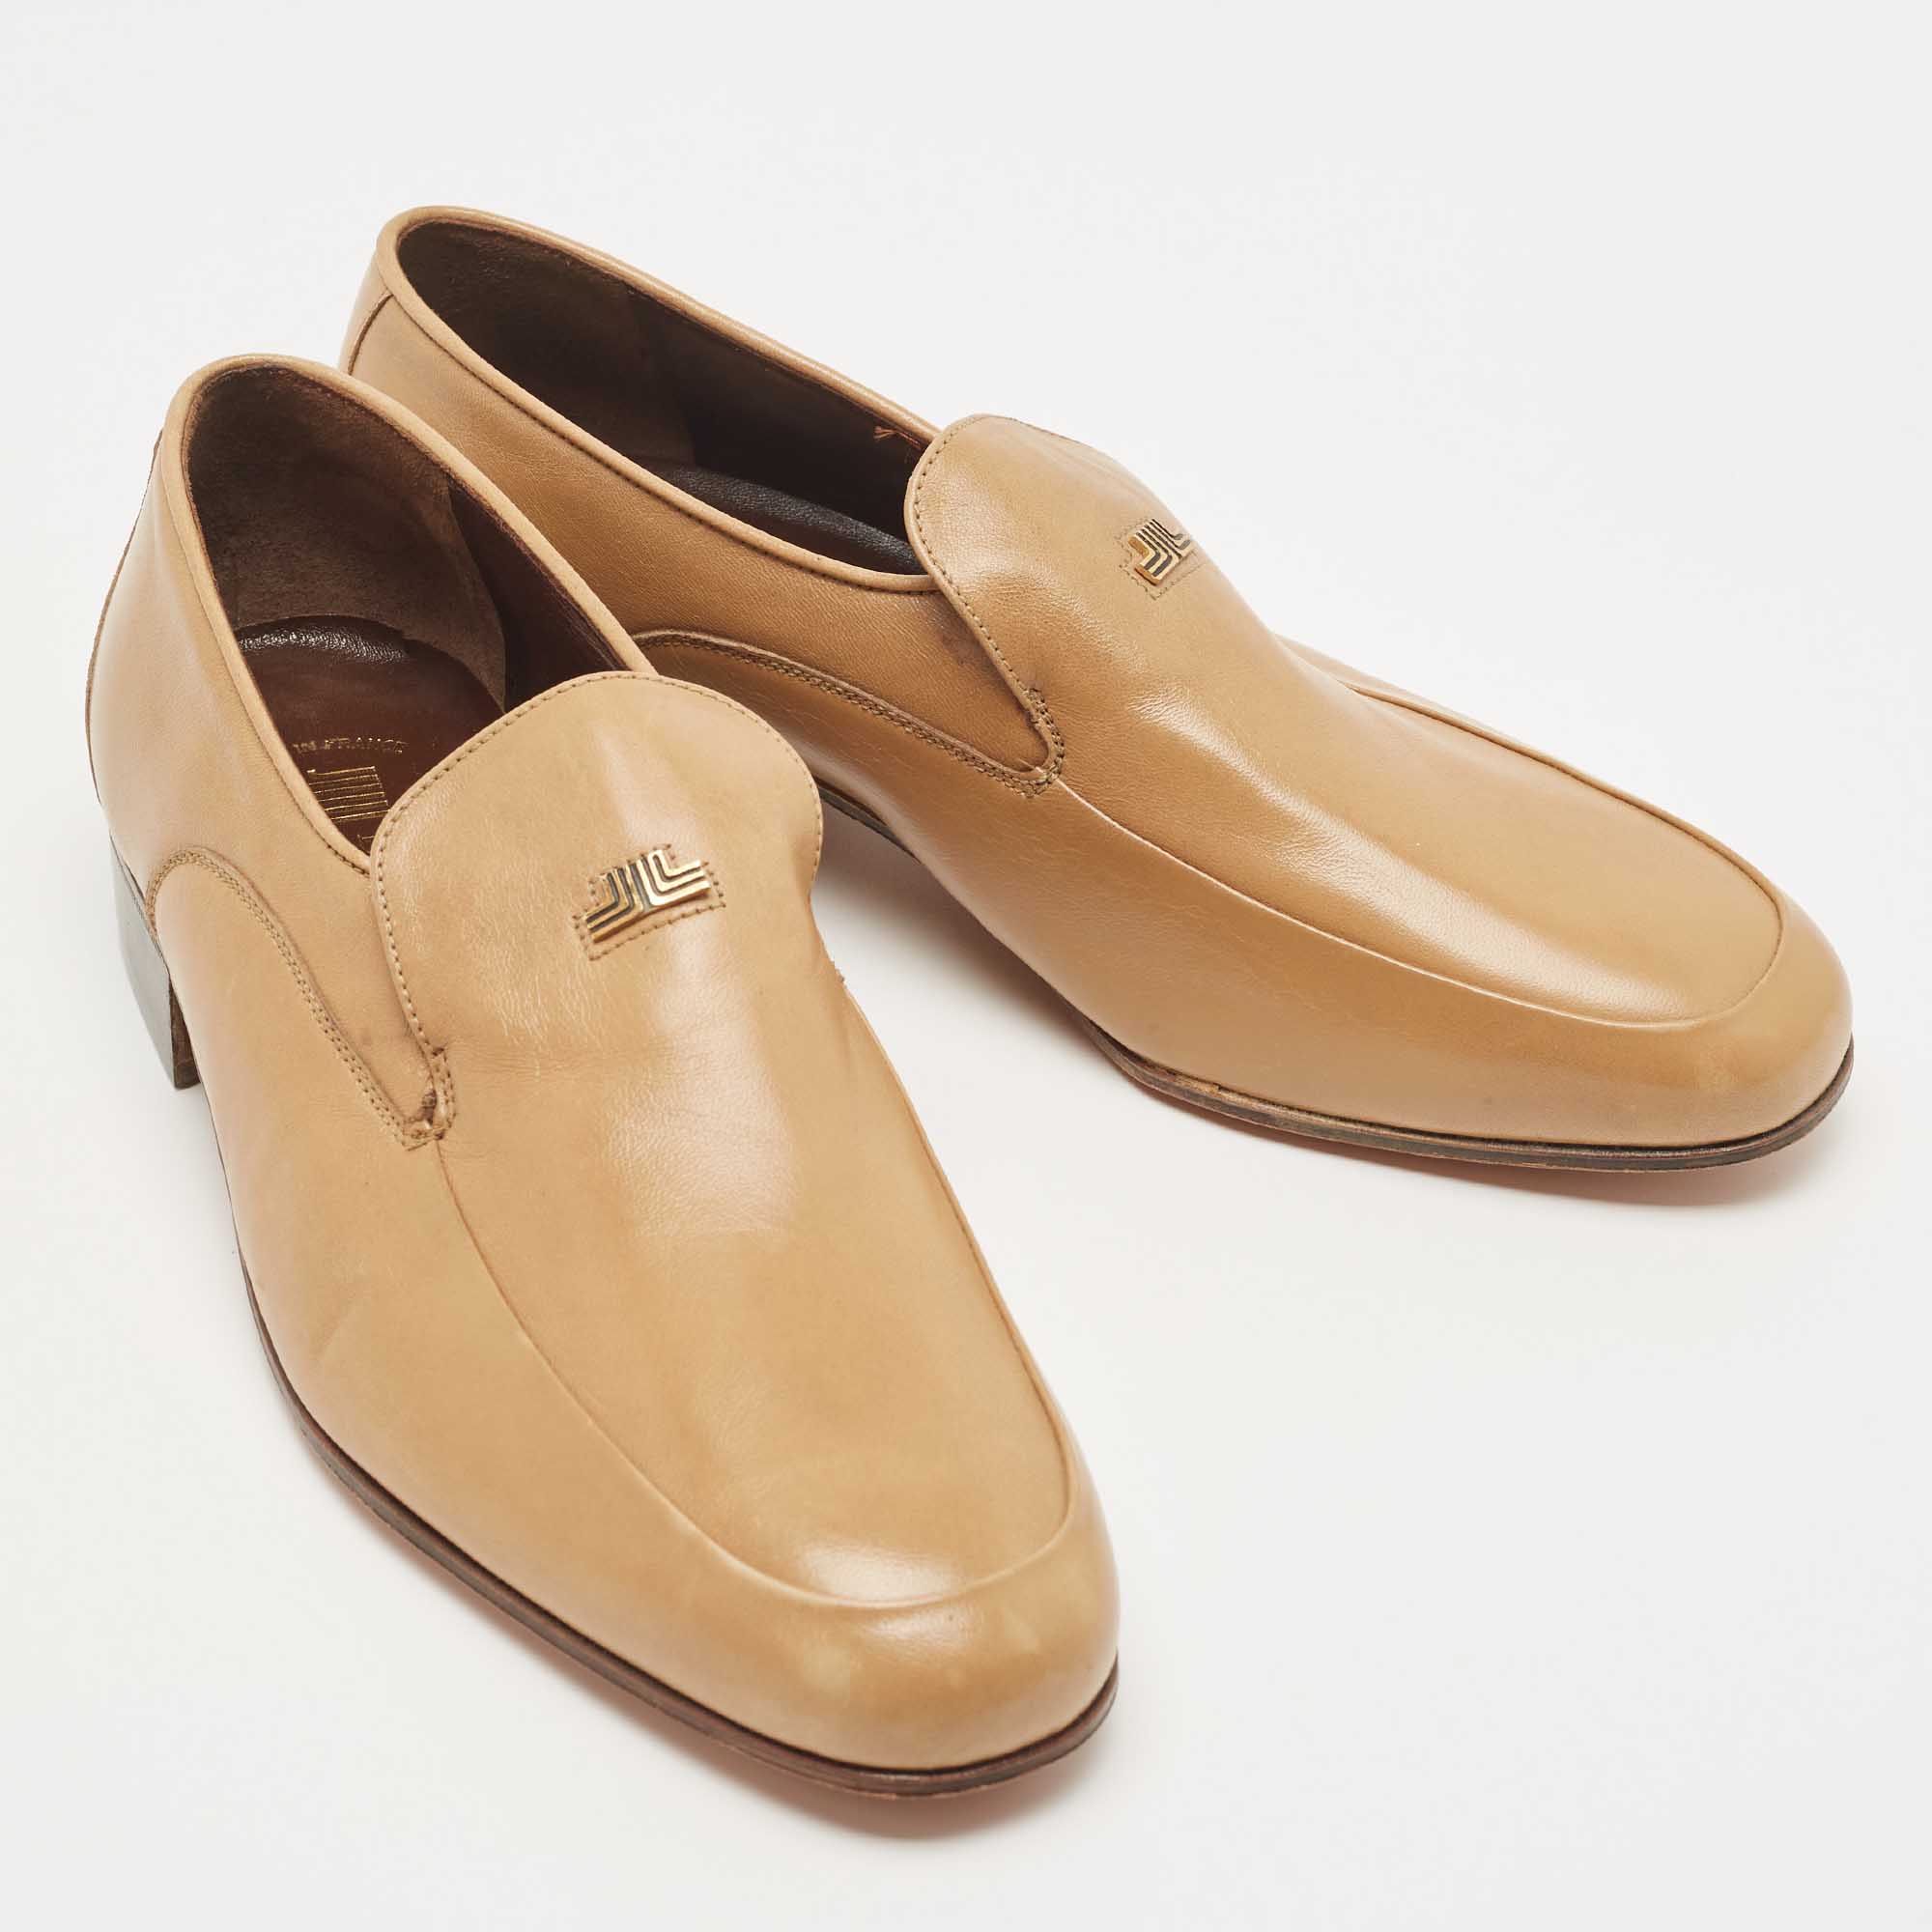 Lanvin Brown Leather Slip On Loafers Size 41.5